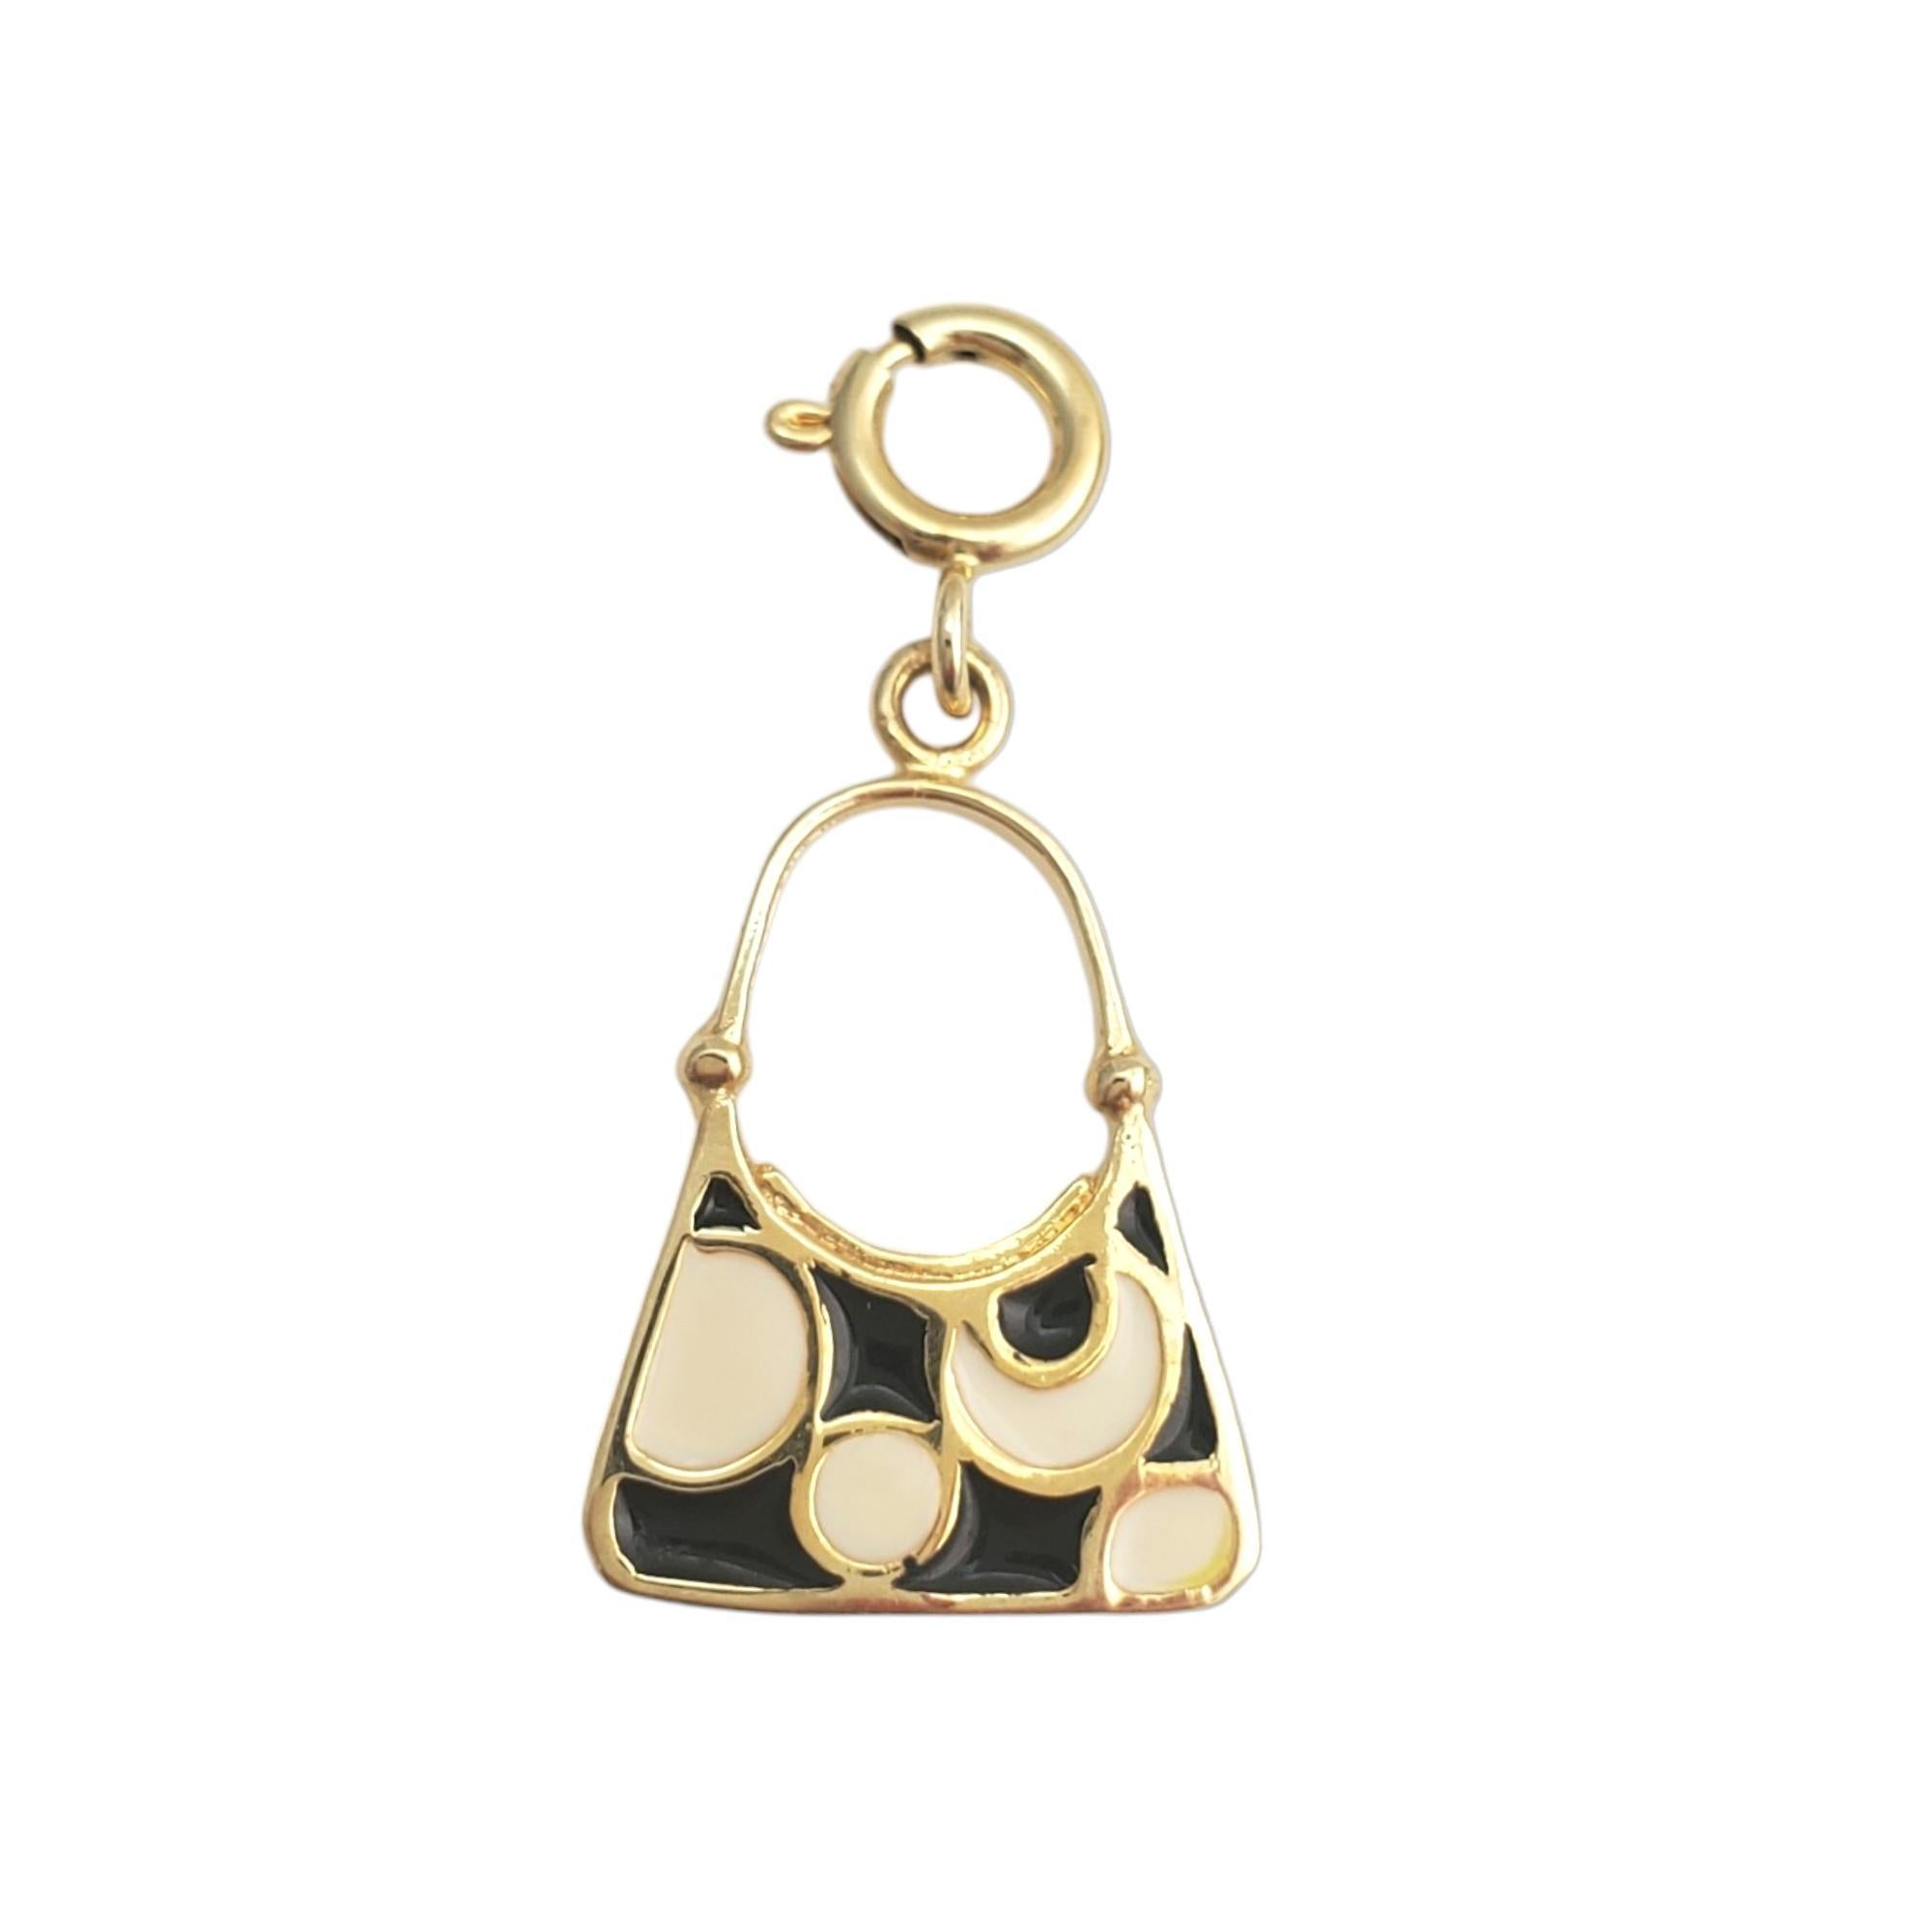 Vintage 10 karat yellow gold purse pendant -

This exquisite purse pendant is a petite accessory that adds a touch of glamour to your style and is set in beautifully detailed 10K yellow gold.

Size: 19.55mm x 13.16mm

Stamped: 10K

Weight: 0.1 gr./